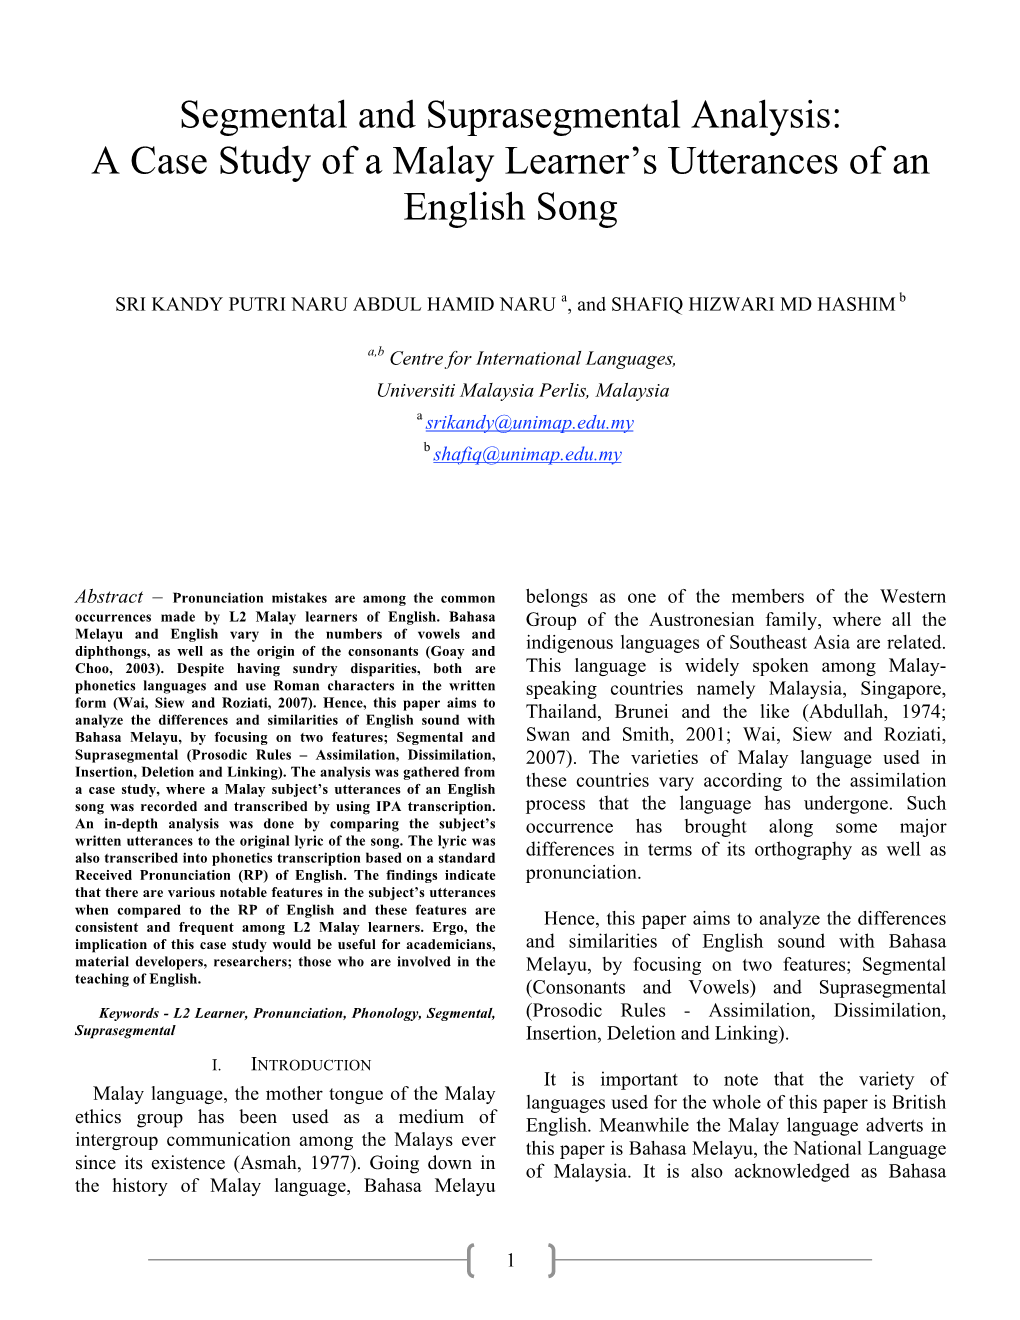 Segmental and Suprasegmental Analysis: a Case Study of a Malay Learner's Utterances of an English Song